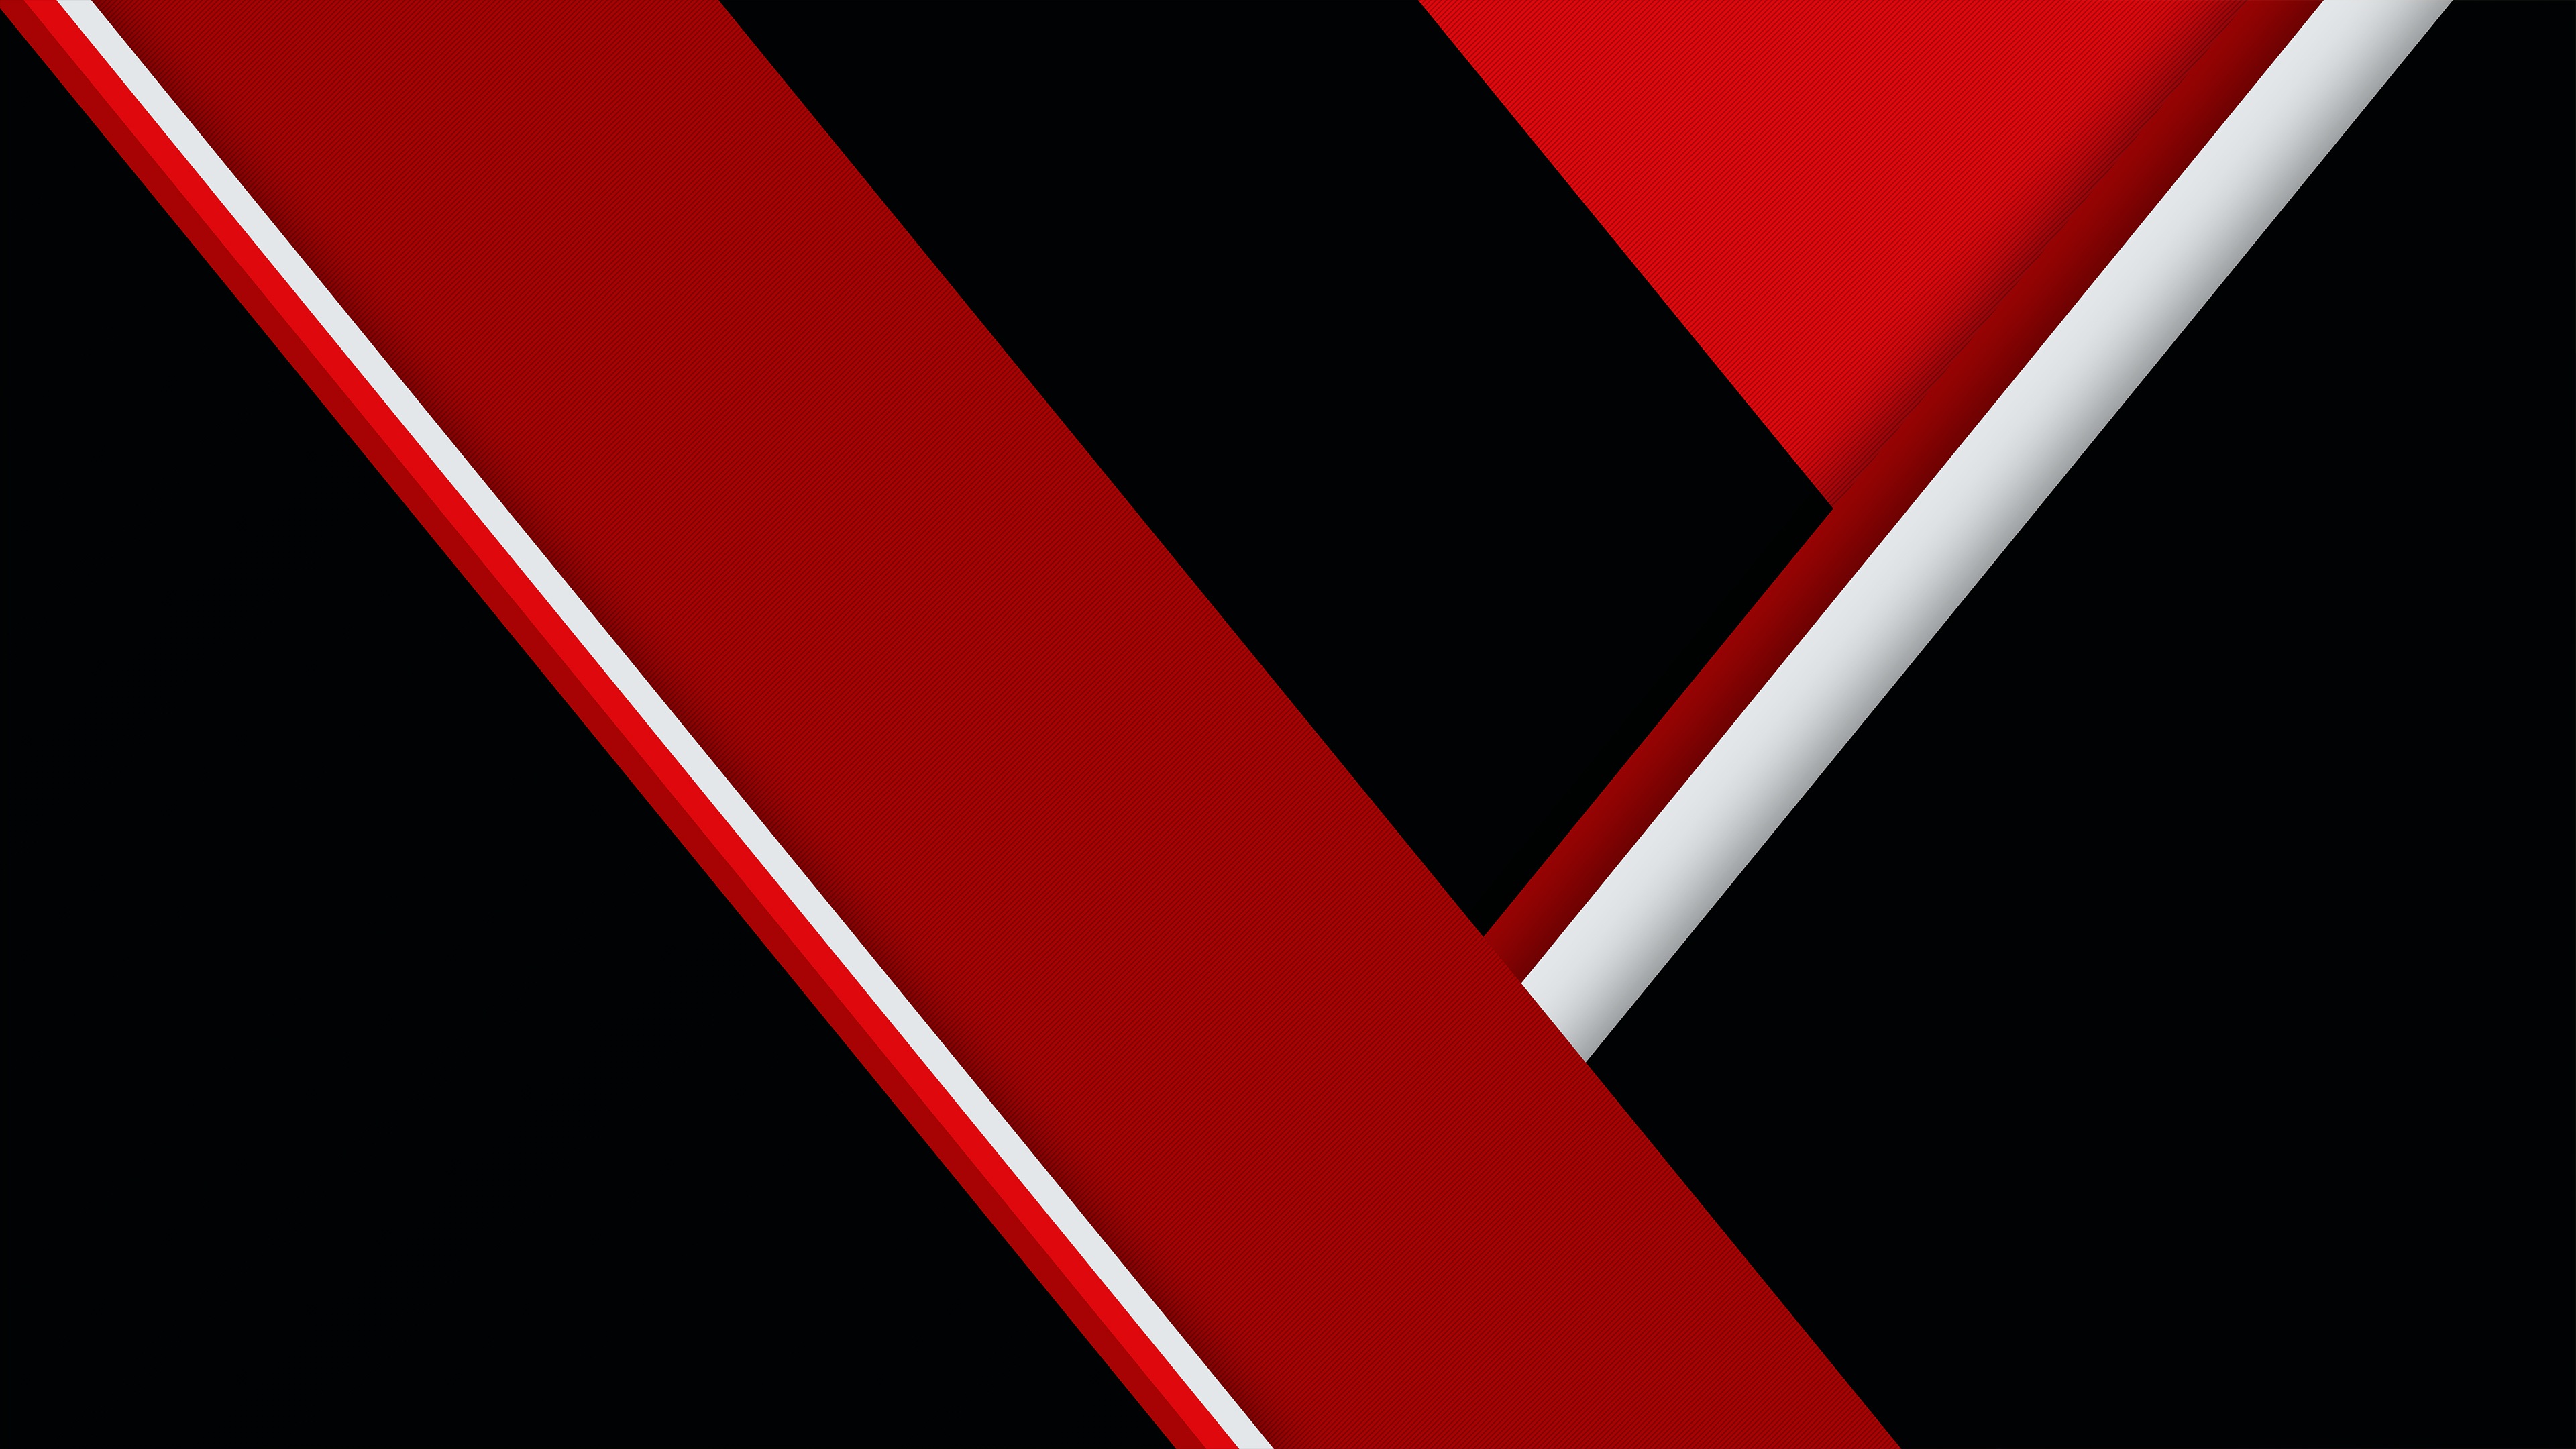 Wallpaper 4k Red Black Texture Shapes Abstract Wallpaper